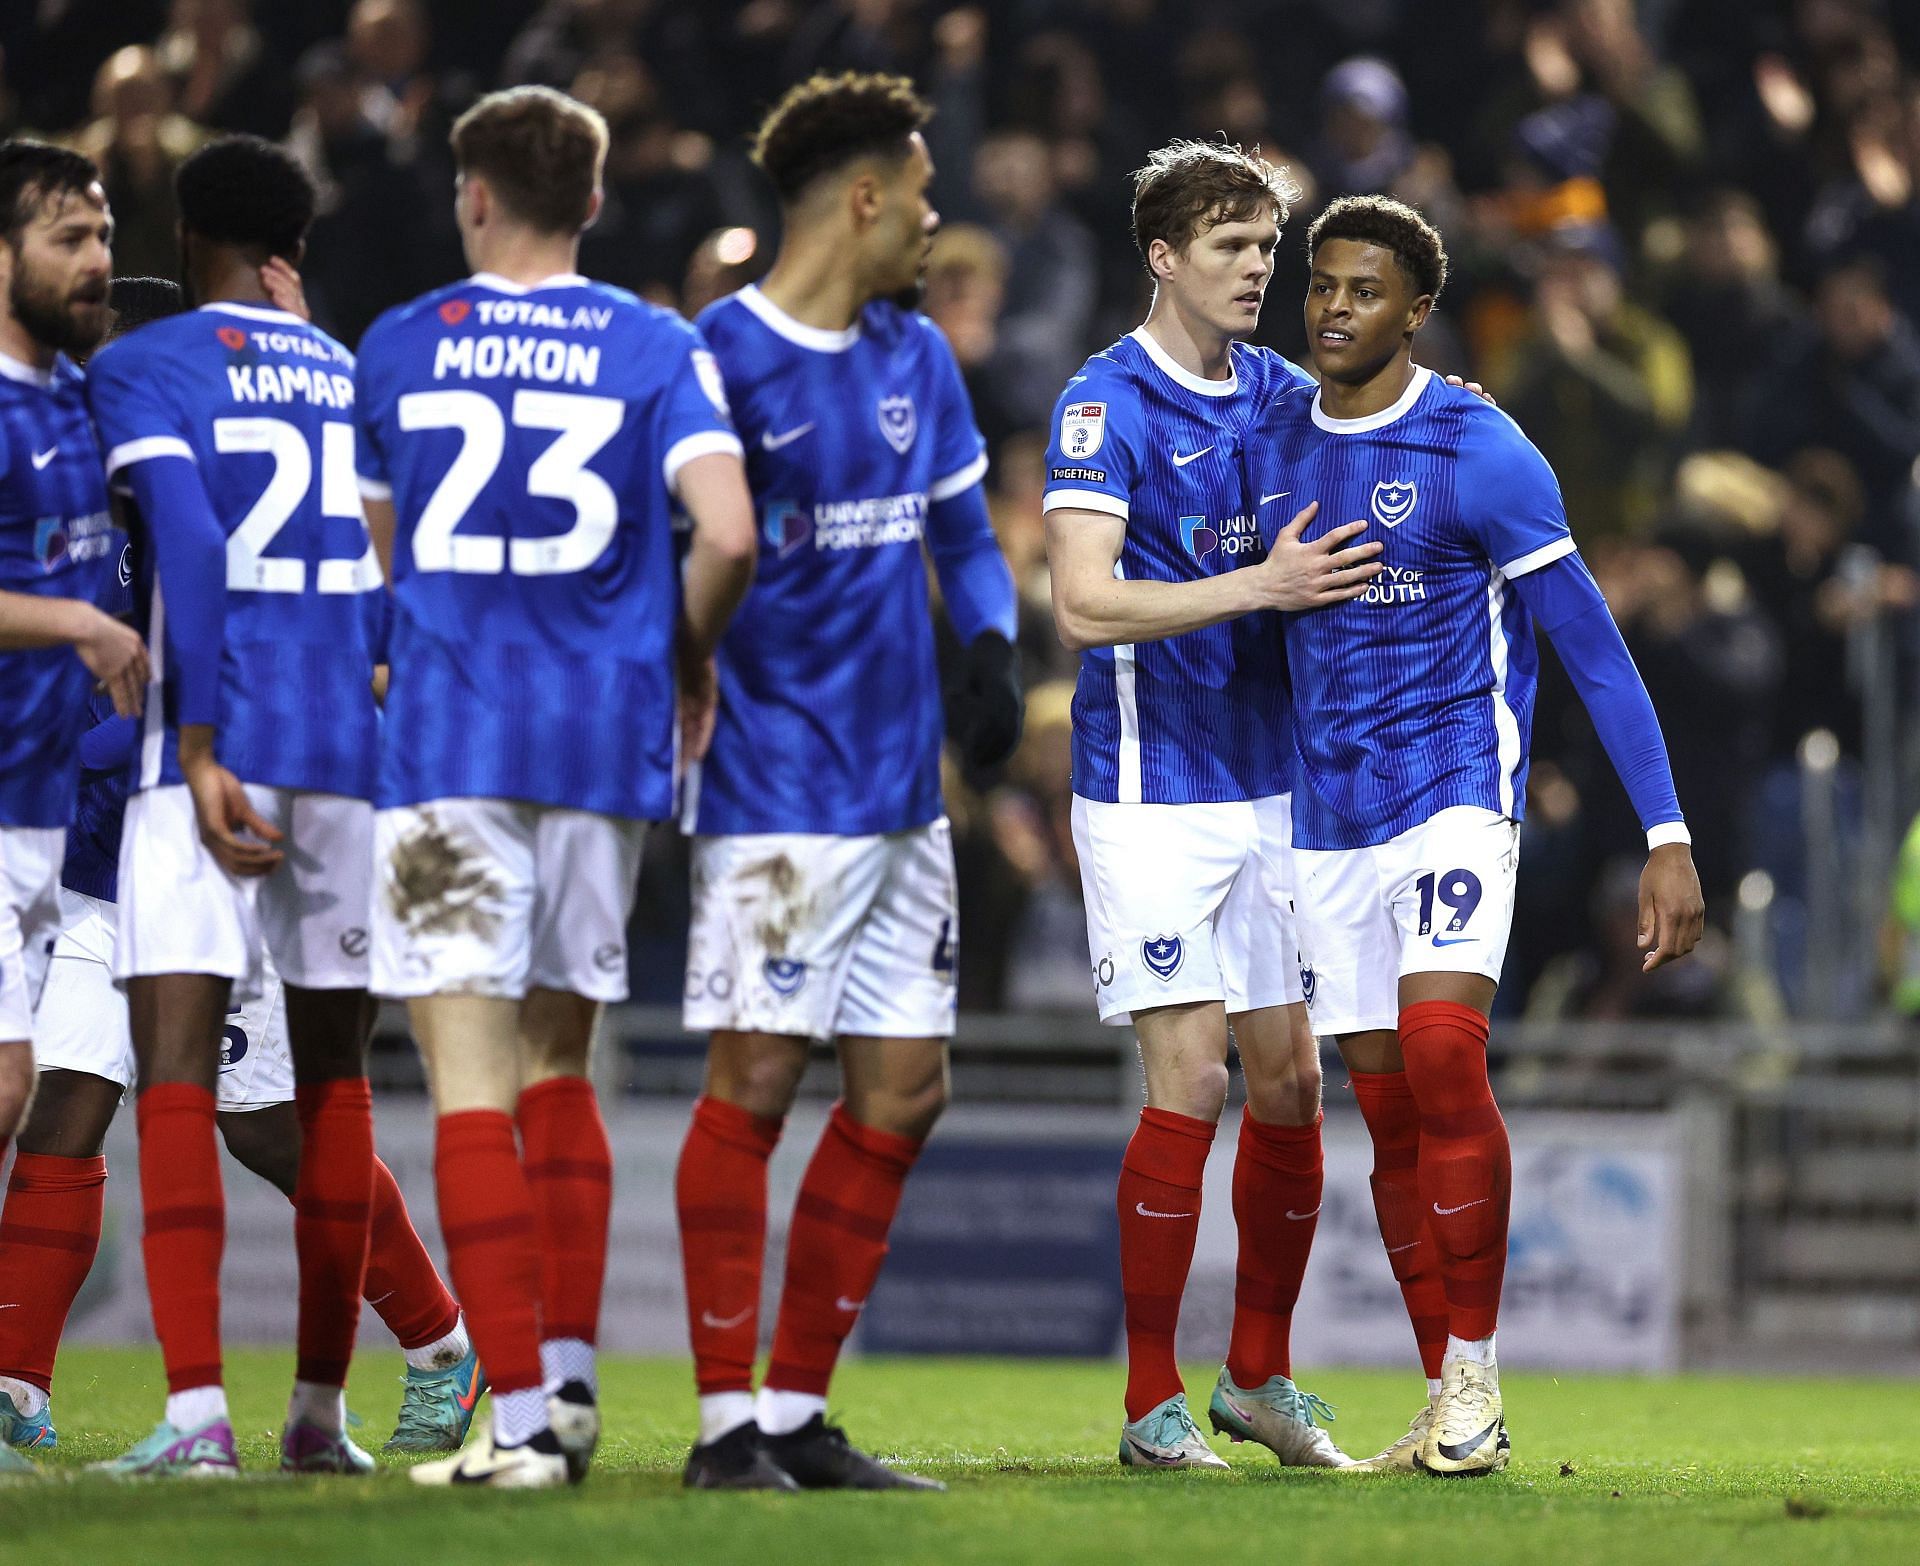 Portsmouth face Wigan Athletic on Saturday 